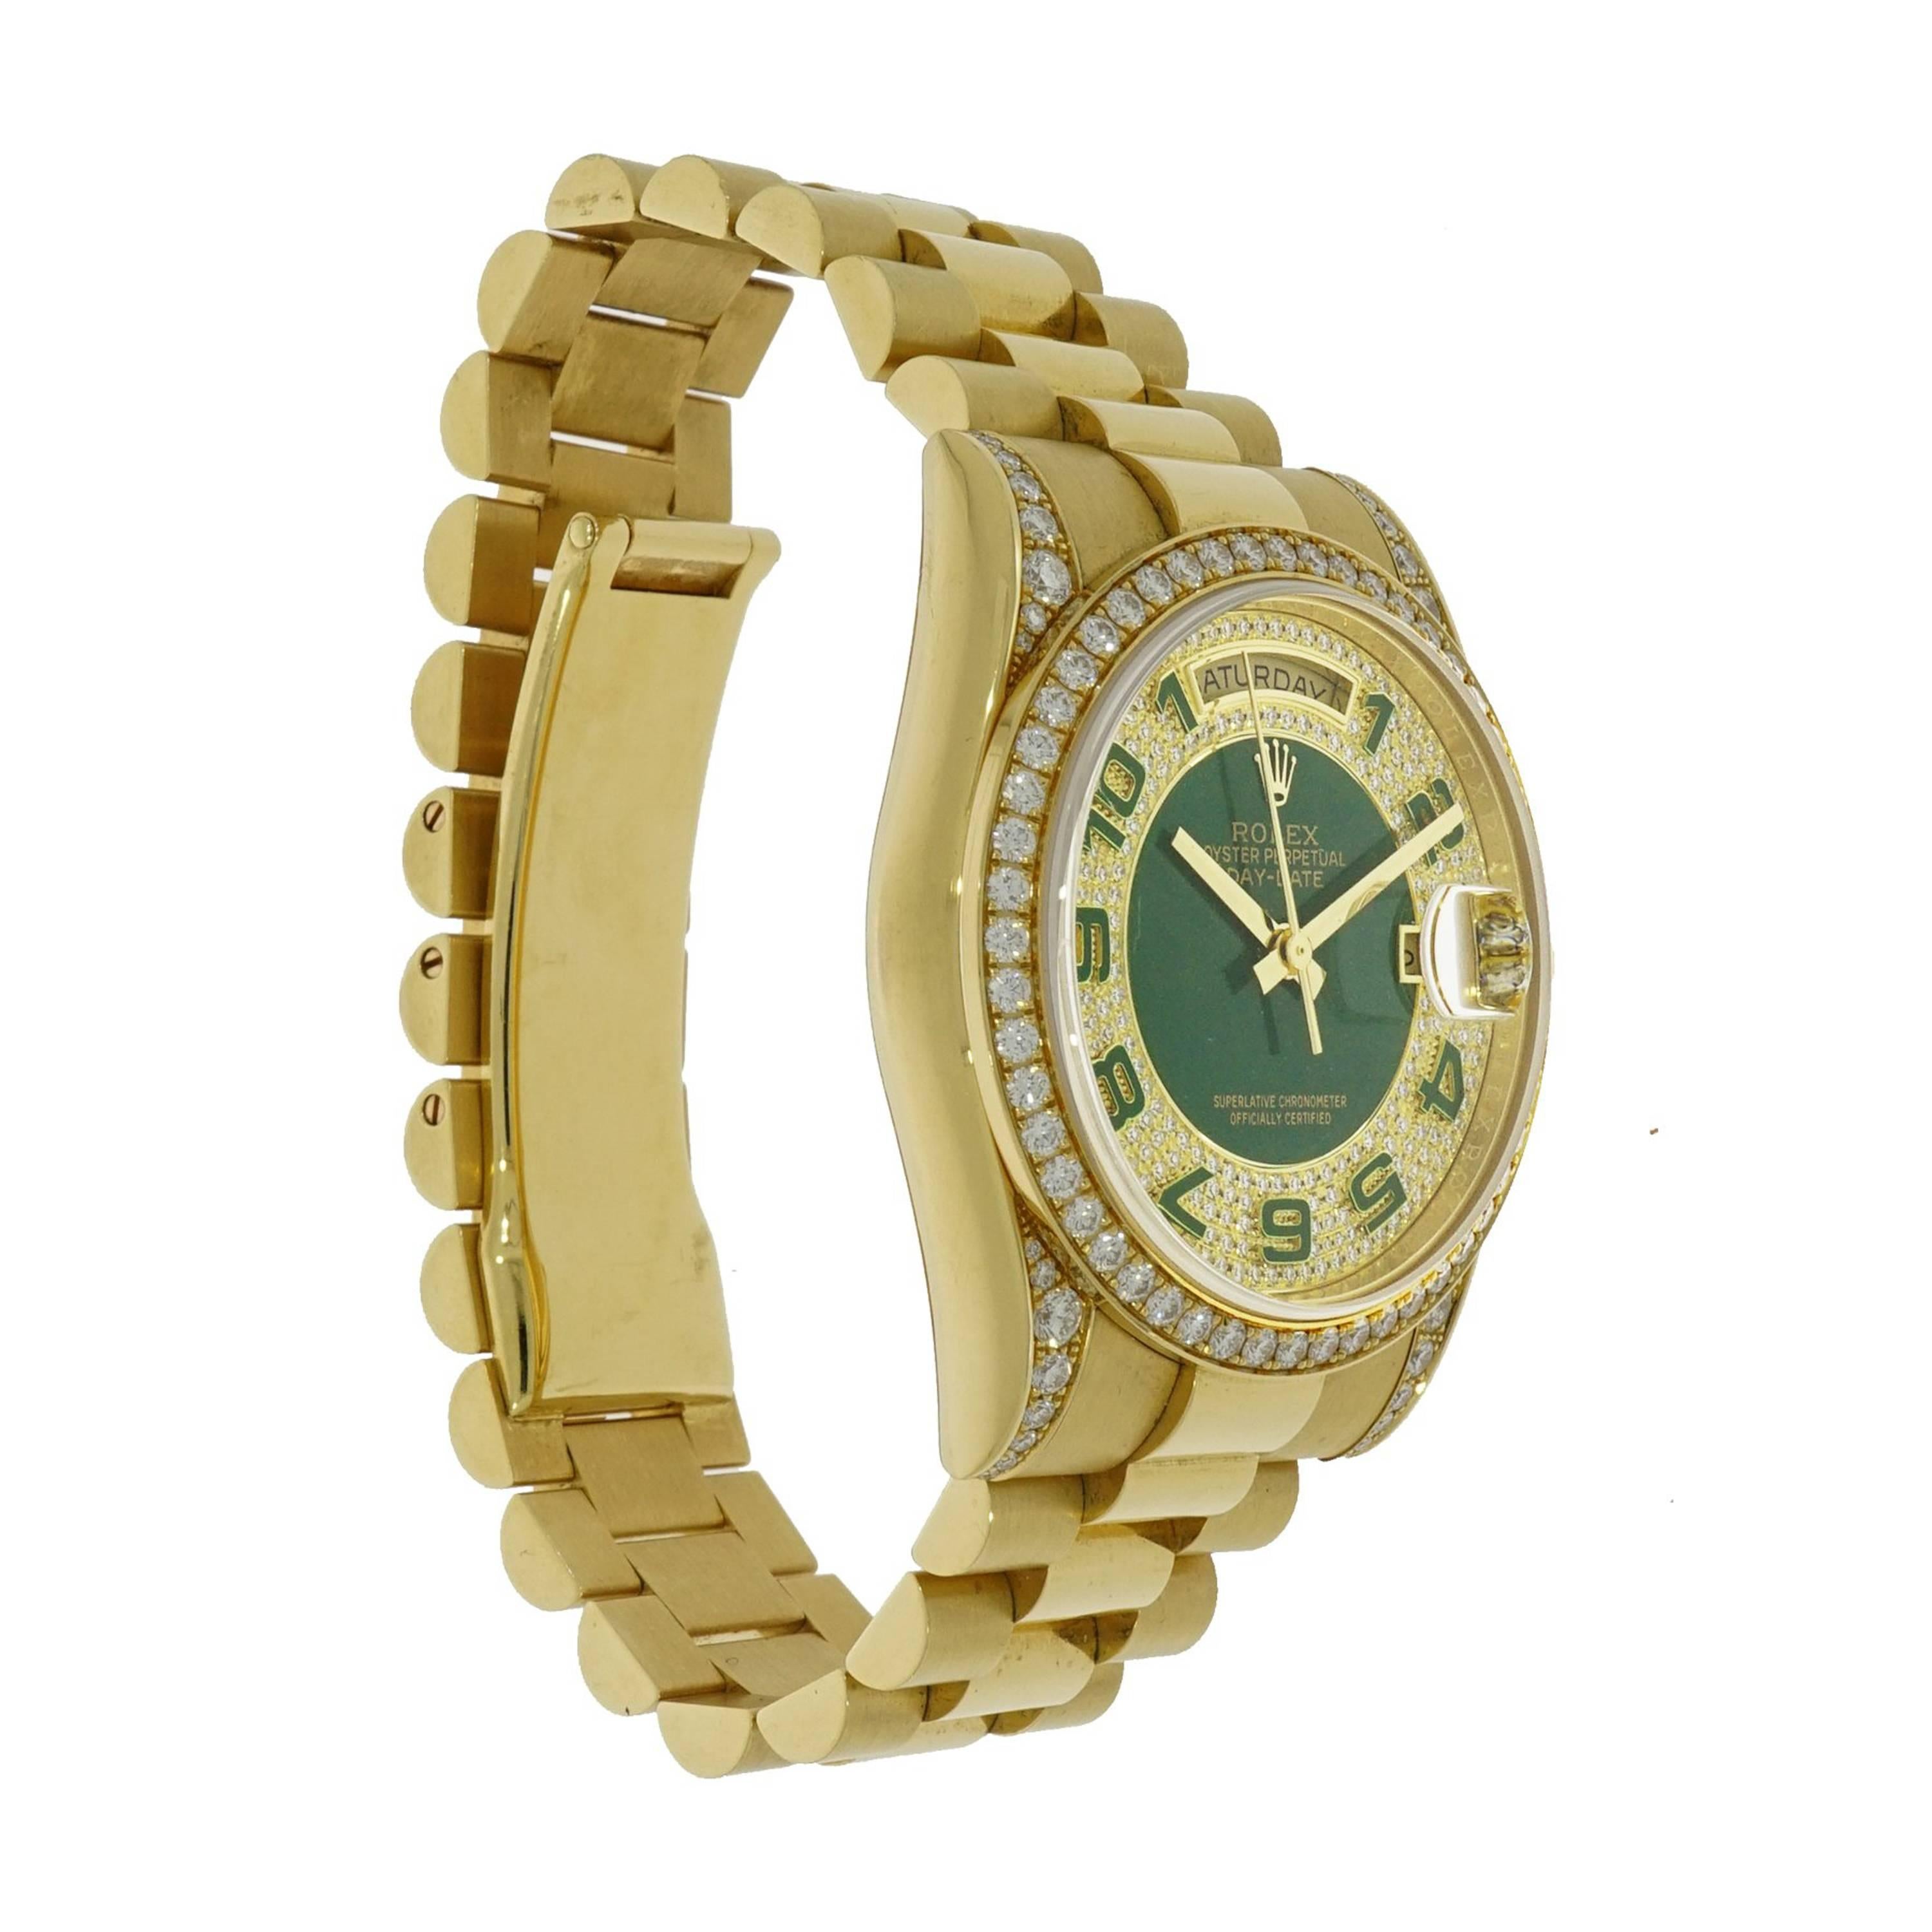 The Day/Date Rolex watch was the first one to spell out the day of the week in full and this watch represents the ultimate refinement.
This timepiece is a sparkling symphony that enhance the watch and enchant the wearer. 
Crafted in 18k yellow gold